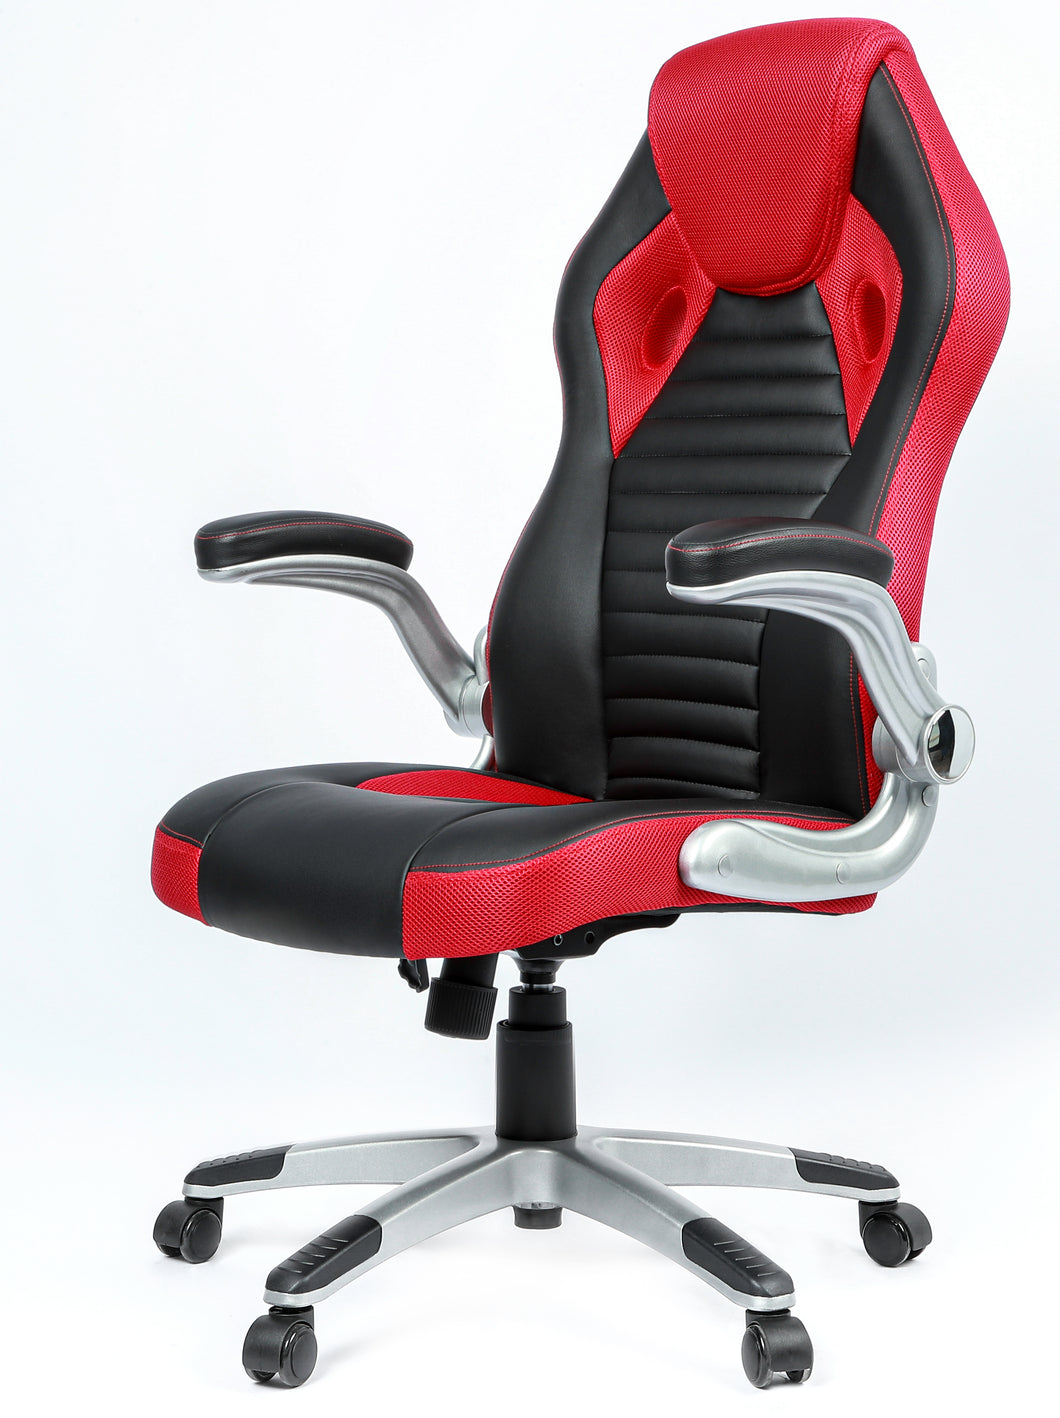 7045 Red and Black Gaming Chair $269.95